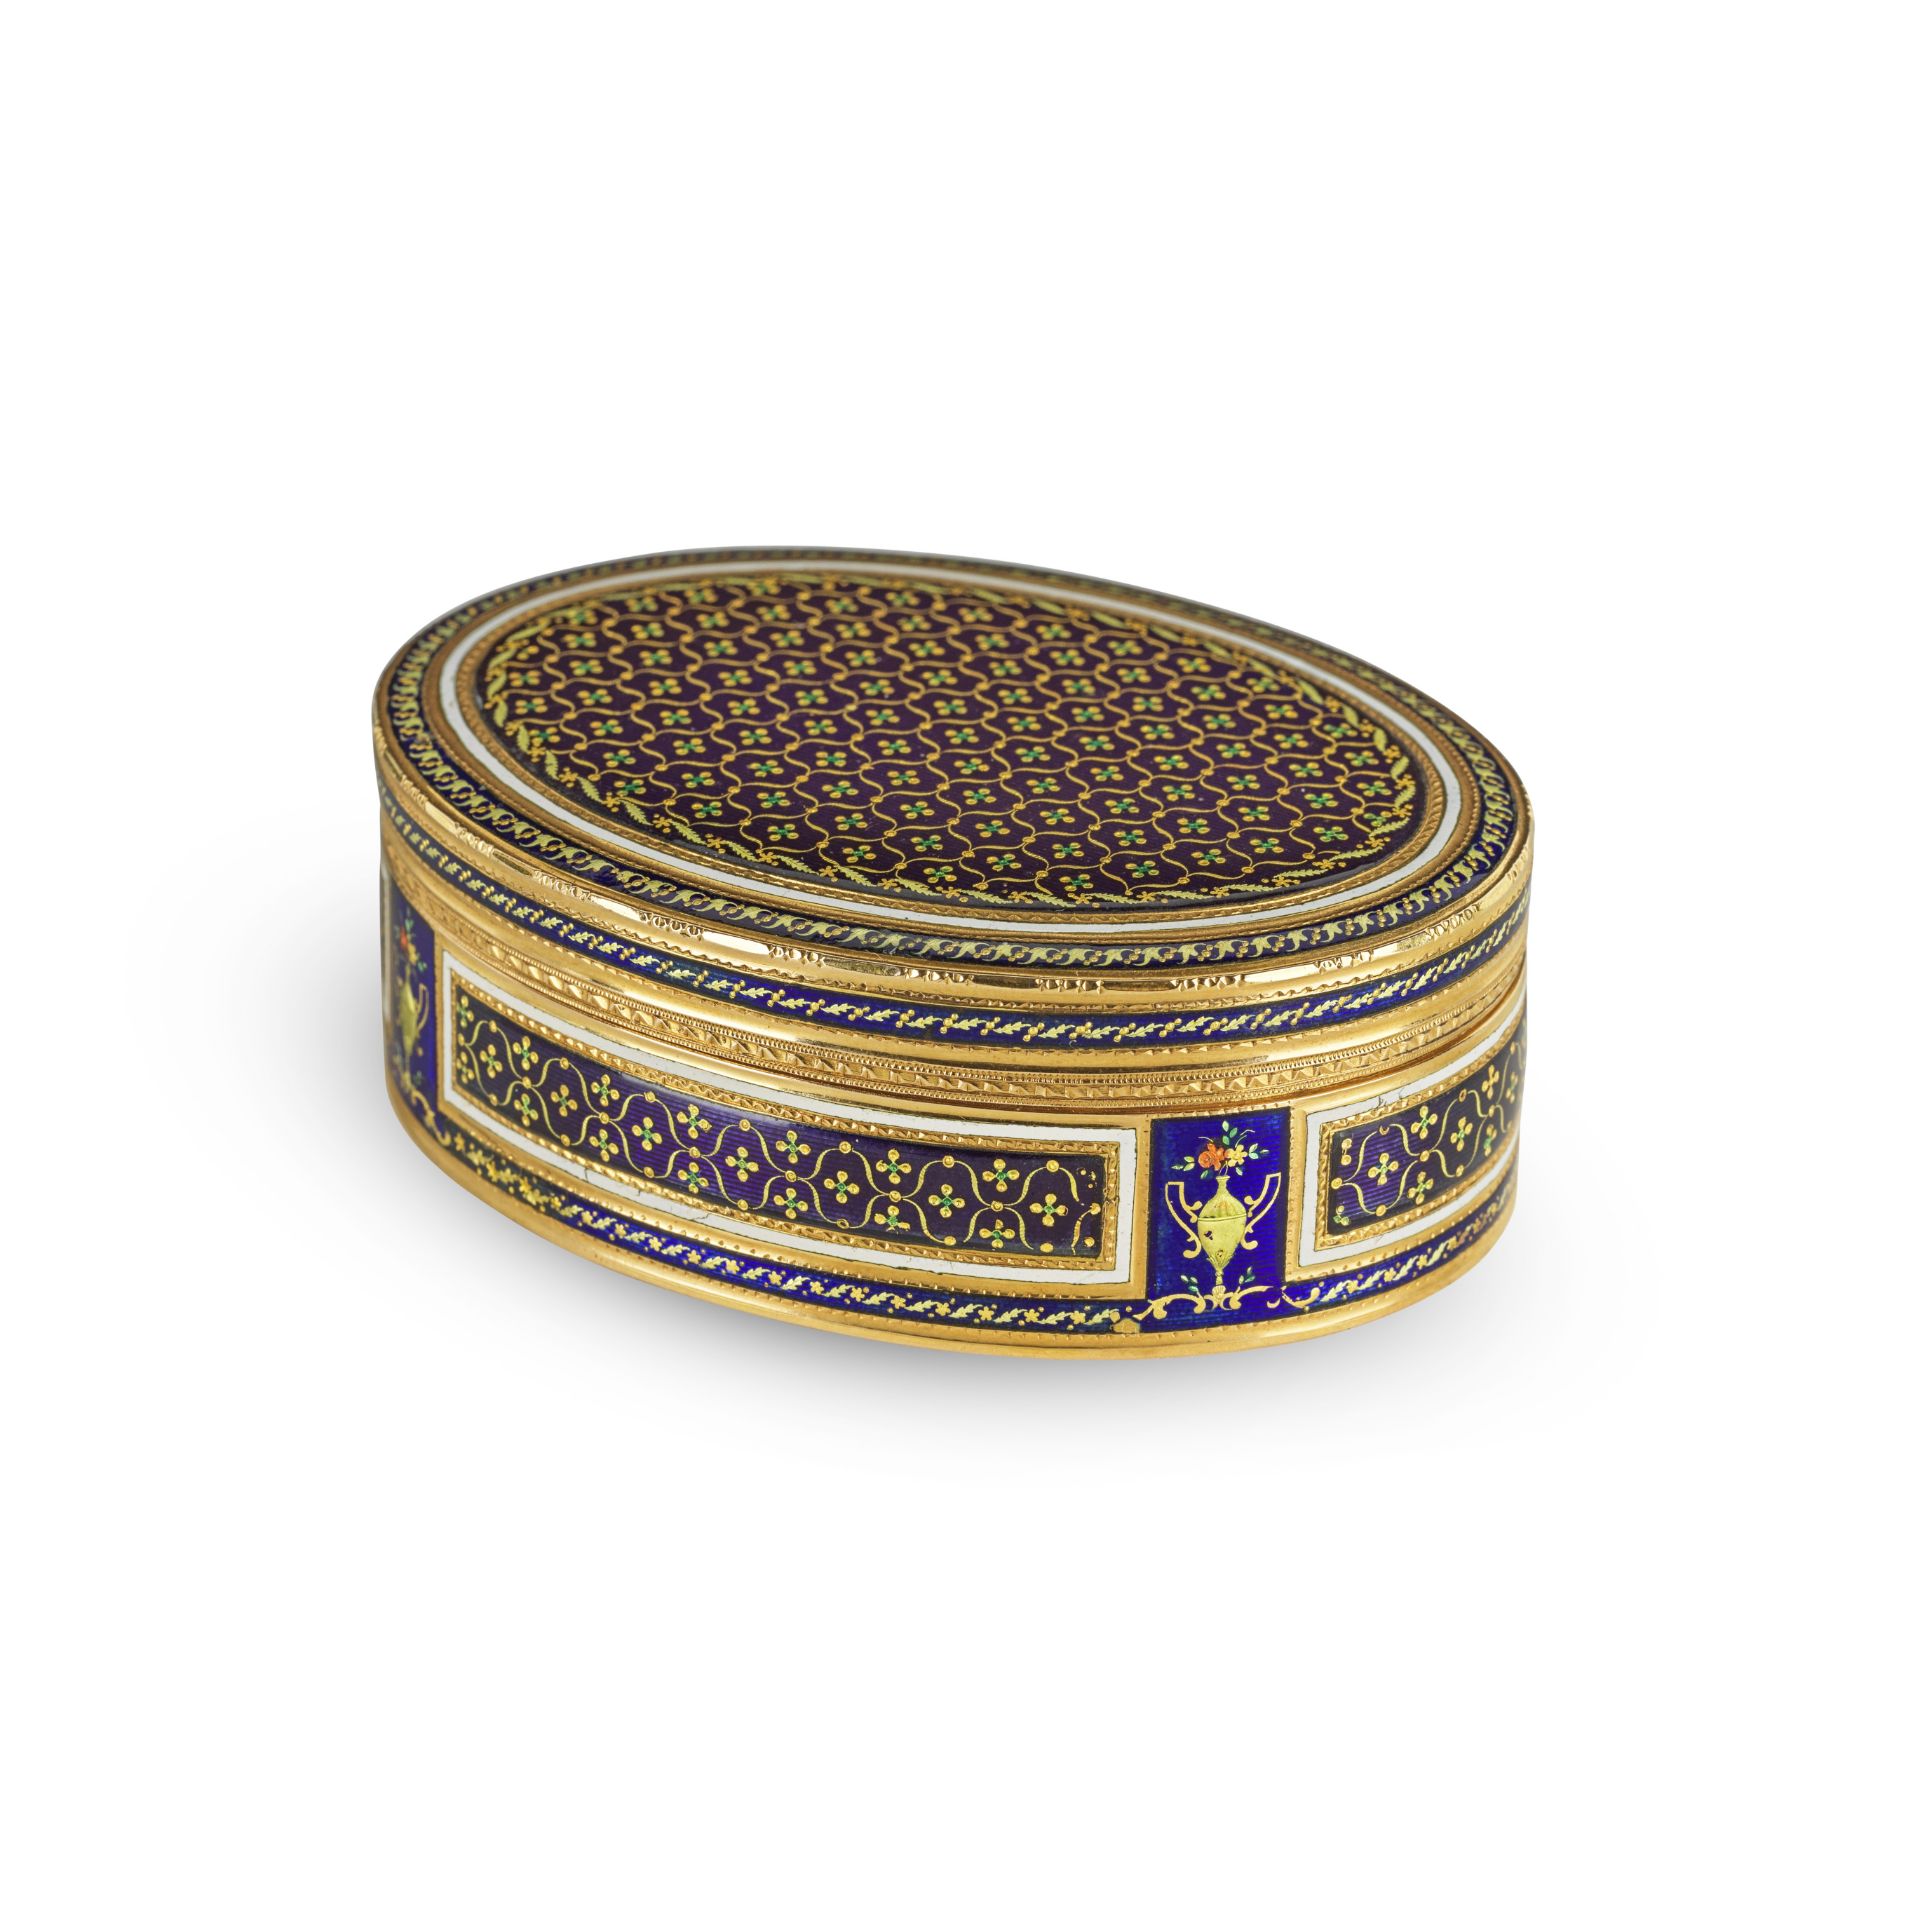 Tabati&#232;re en or et &#233;mail, possiblement Hanau, vers 1785A gold and enamel snuffbox, pos...